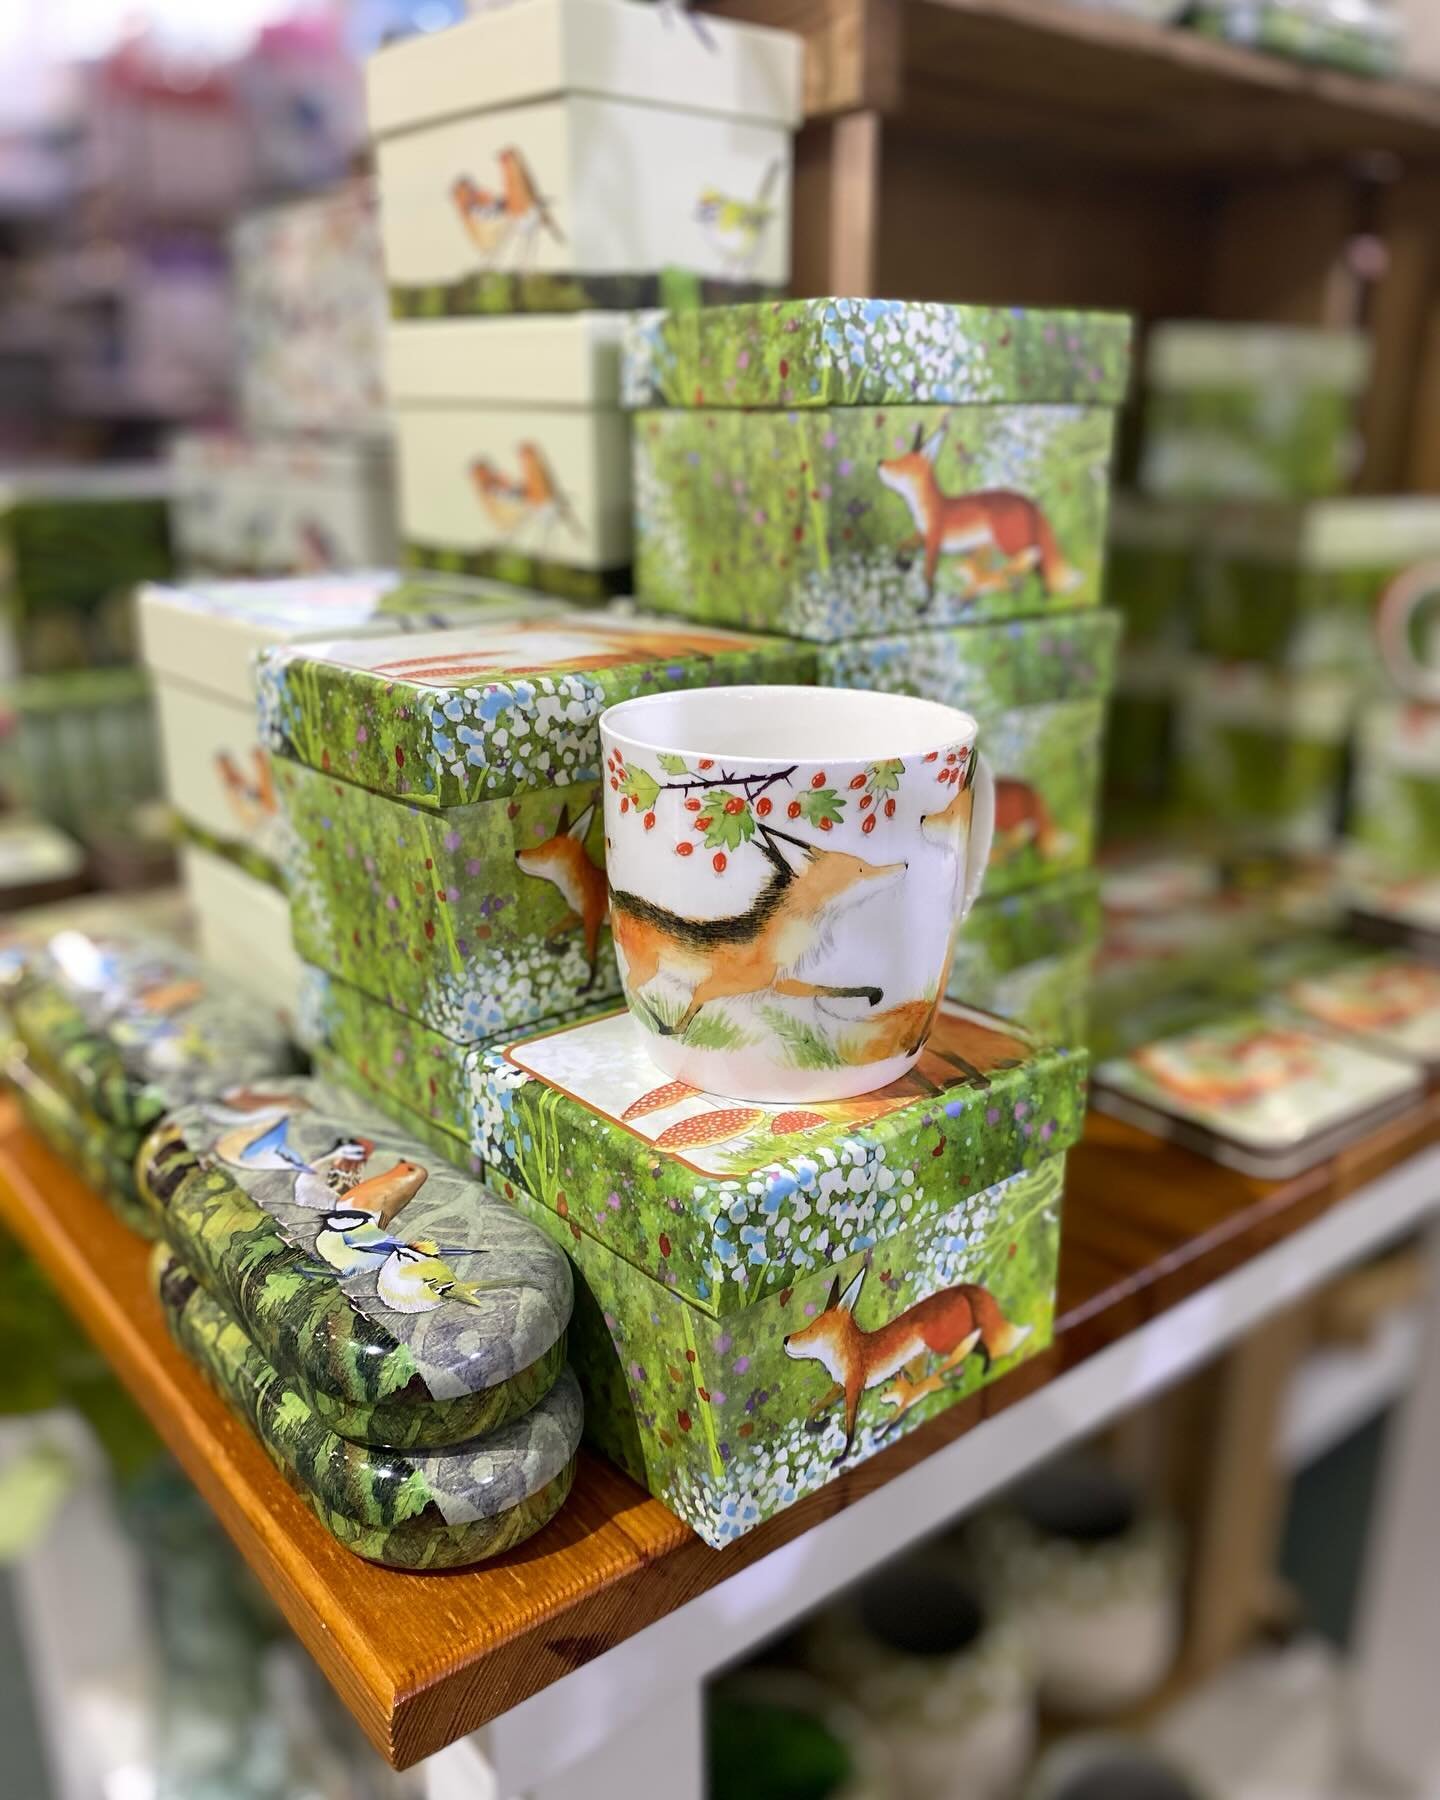 New in at our Woldingham Centre; Emma Ball!
Beautifully illustrated mugs, chopping boards, tins, screen/glasses cloths and coasters. They make lovely gifts or just a treat for yourself 😃
.
.
.
.
#knightsgardencentres #emmaballltd #giftideas #wolding